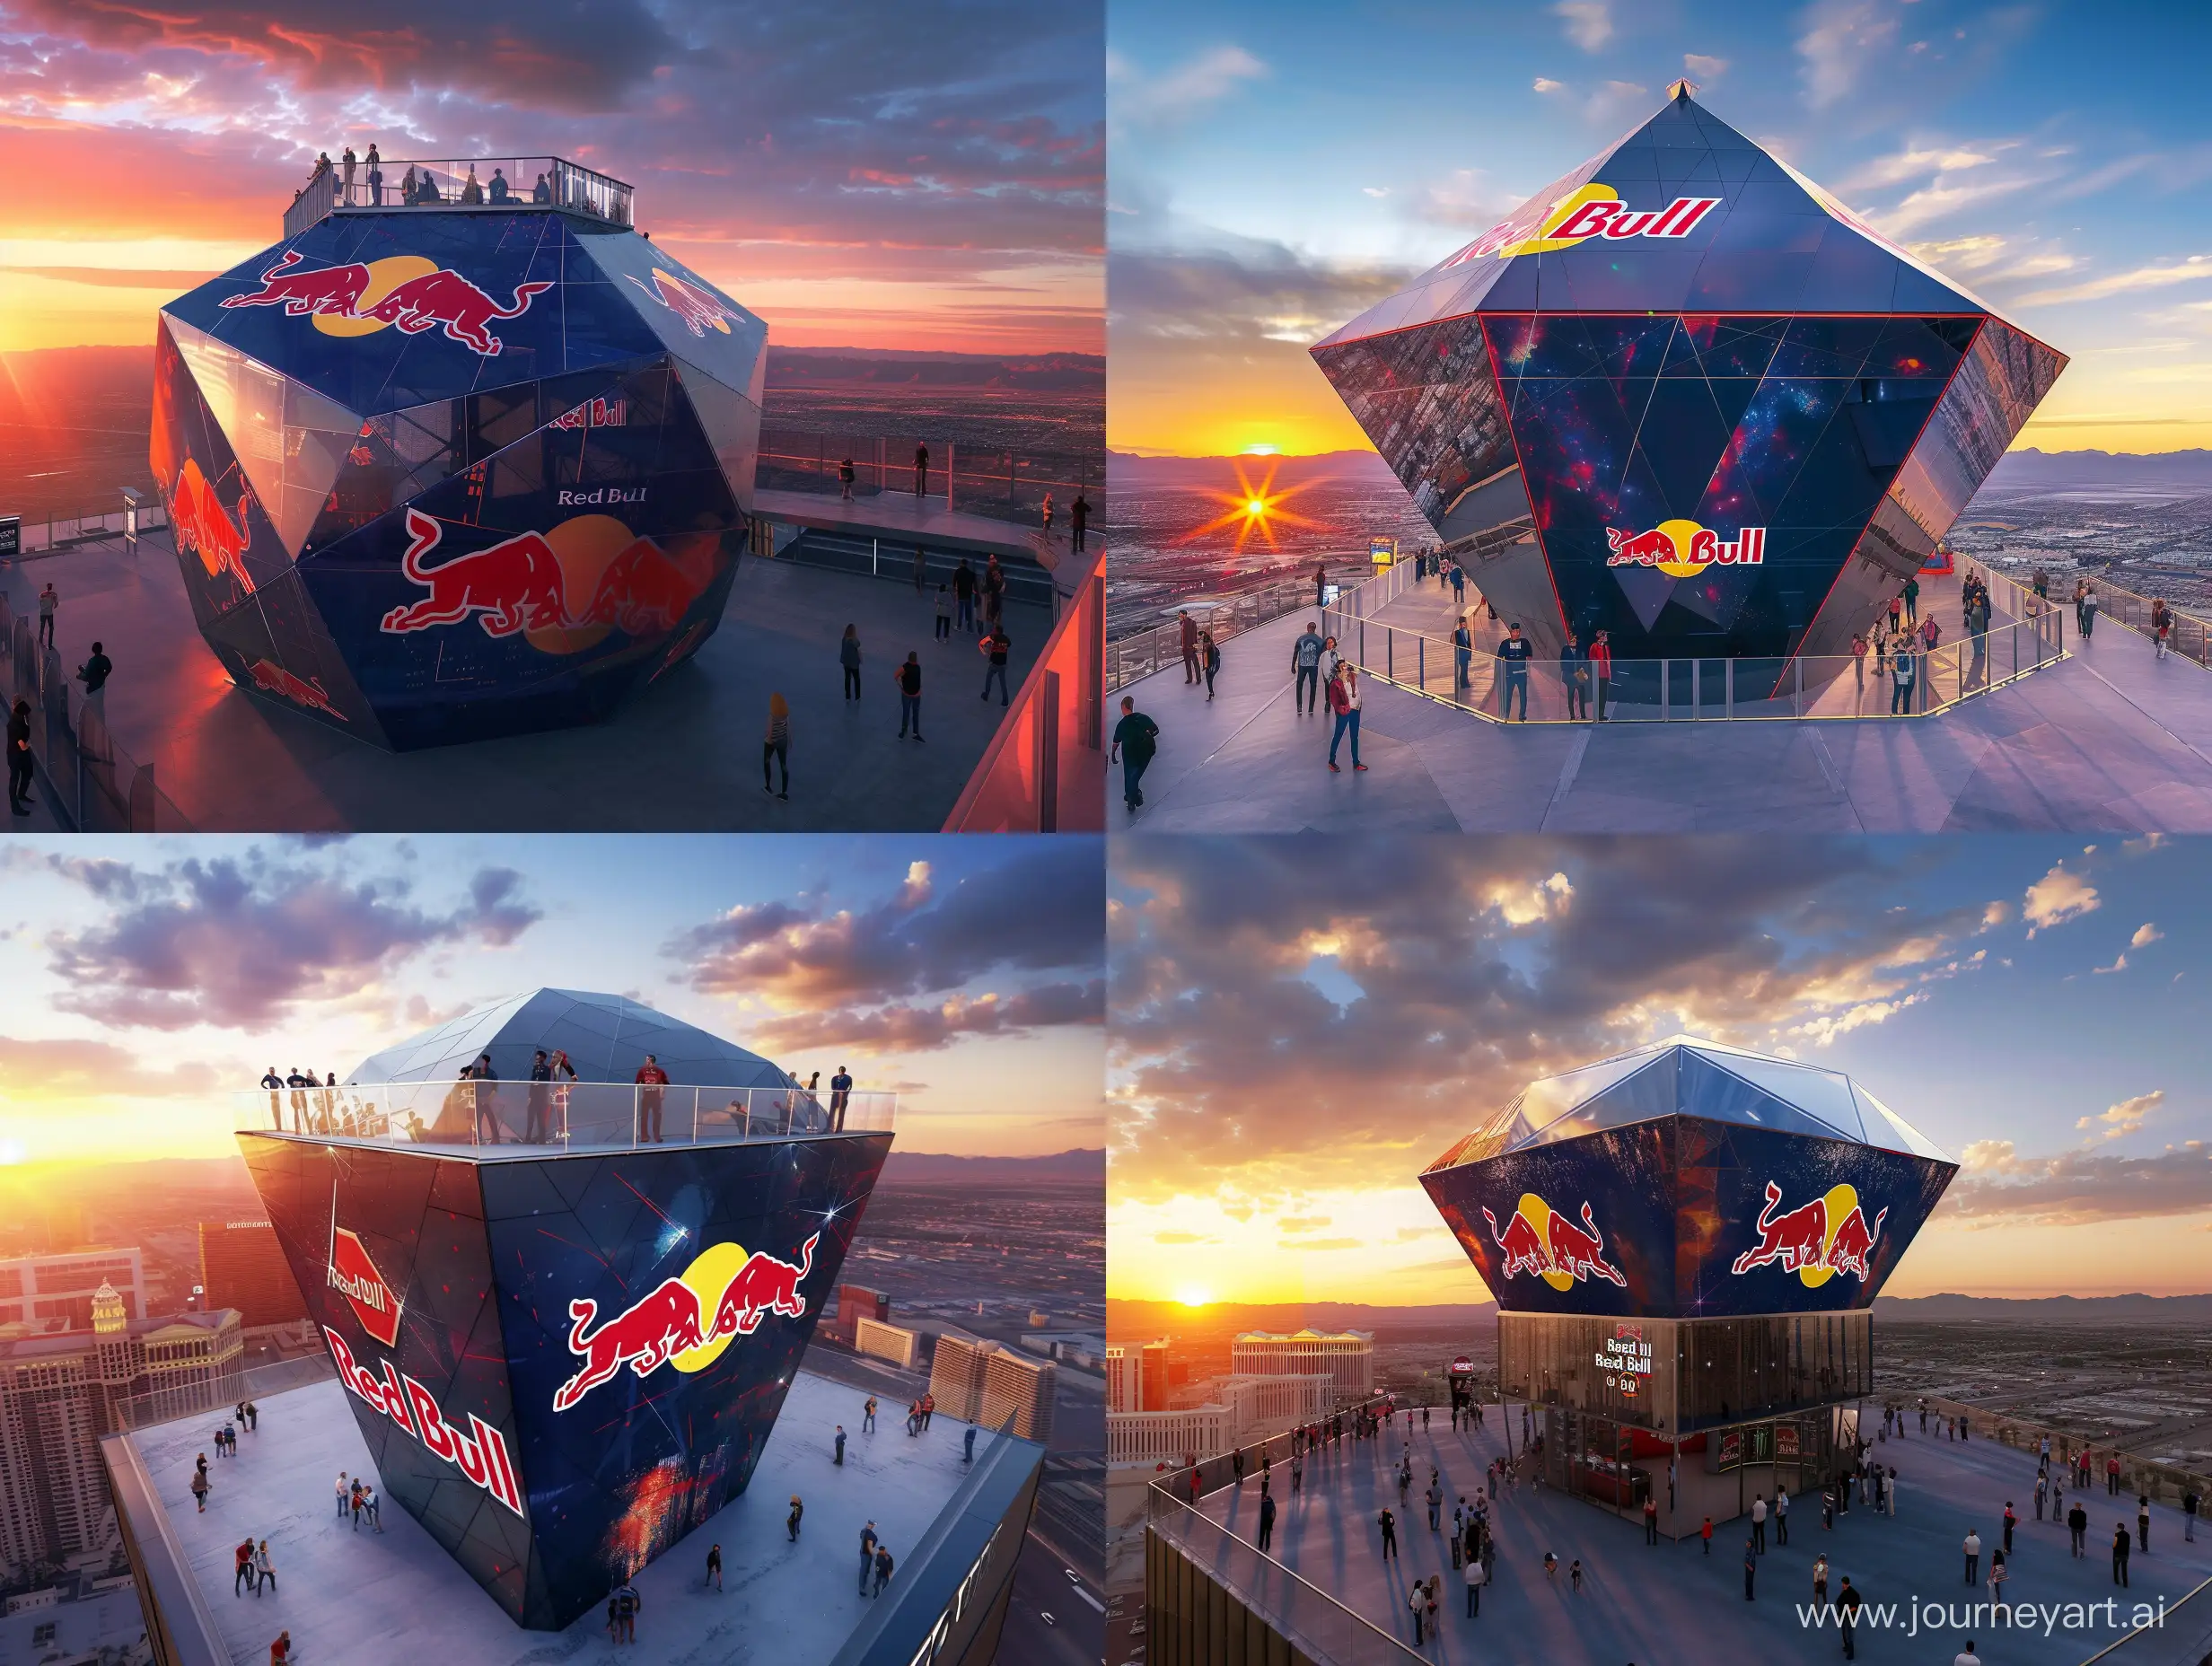 Imagine the Las Vegas Sphere, but owned by Red Bull. Instead of a Sphere, make it a square. However, the roof needs to have the shape of a 2D rhombus, so when you watch the building from the top, you can notice the rhombus.
Please have a realistic approach, make it it look like a photograph. Red Bull visuals have to cover the whole building, not only a logo in a corner. The walls need to be able to be dismounted, transported somewhere else, and the building built again.
Please make sure the branding is correct. Make sure "Red Bull" is well written, and the logo is right. 

Please picture people around it, and nice sky and realistic sunset behind.

Please generate the view from the top so the rhombus side can be seen.